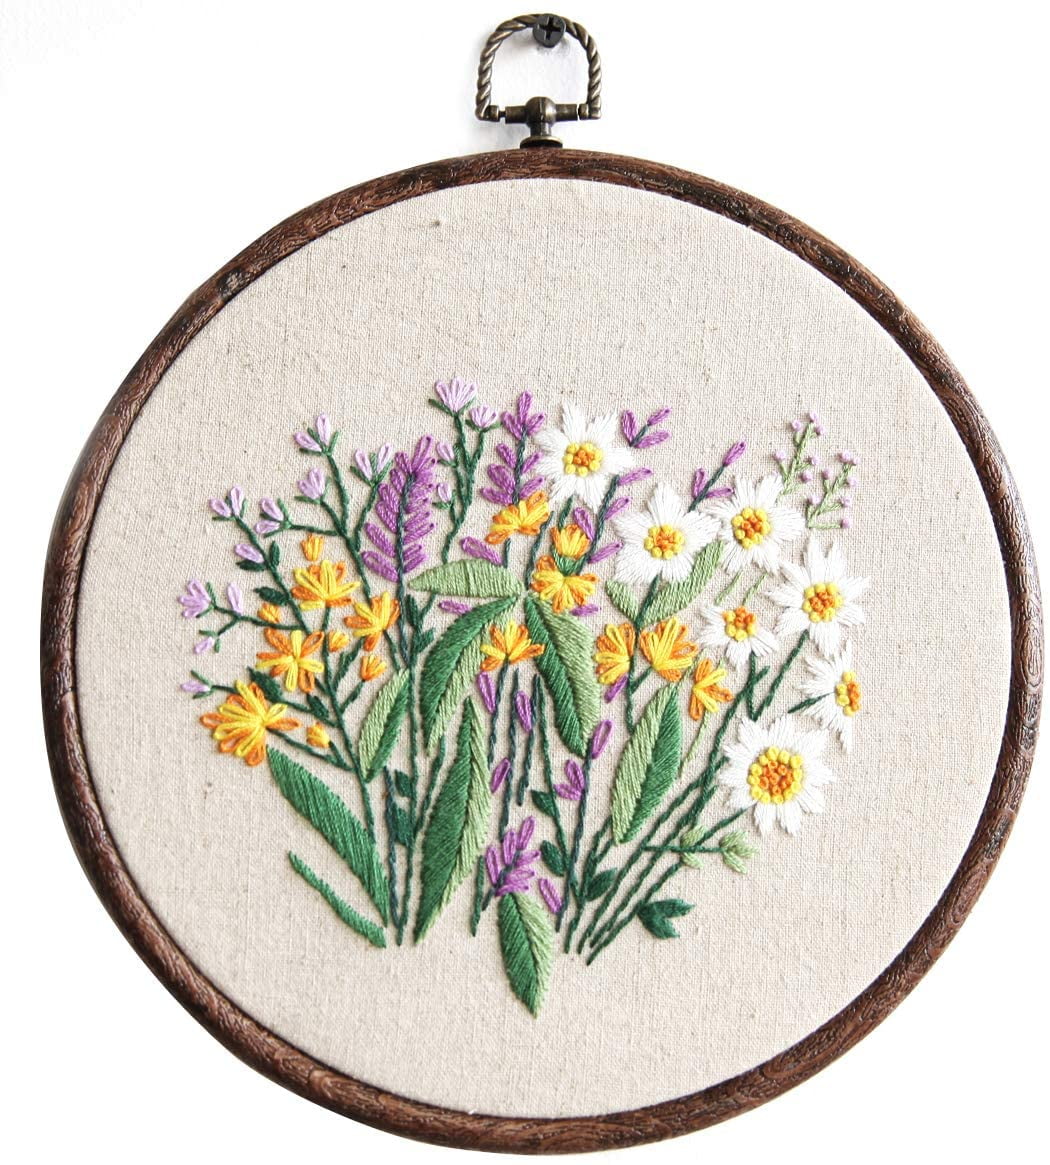 Embroidery Kit for Beginners with Pattern Cross Stitch kit